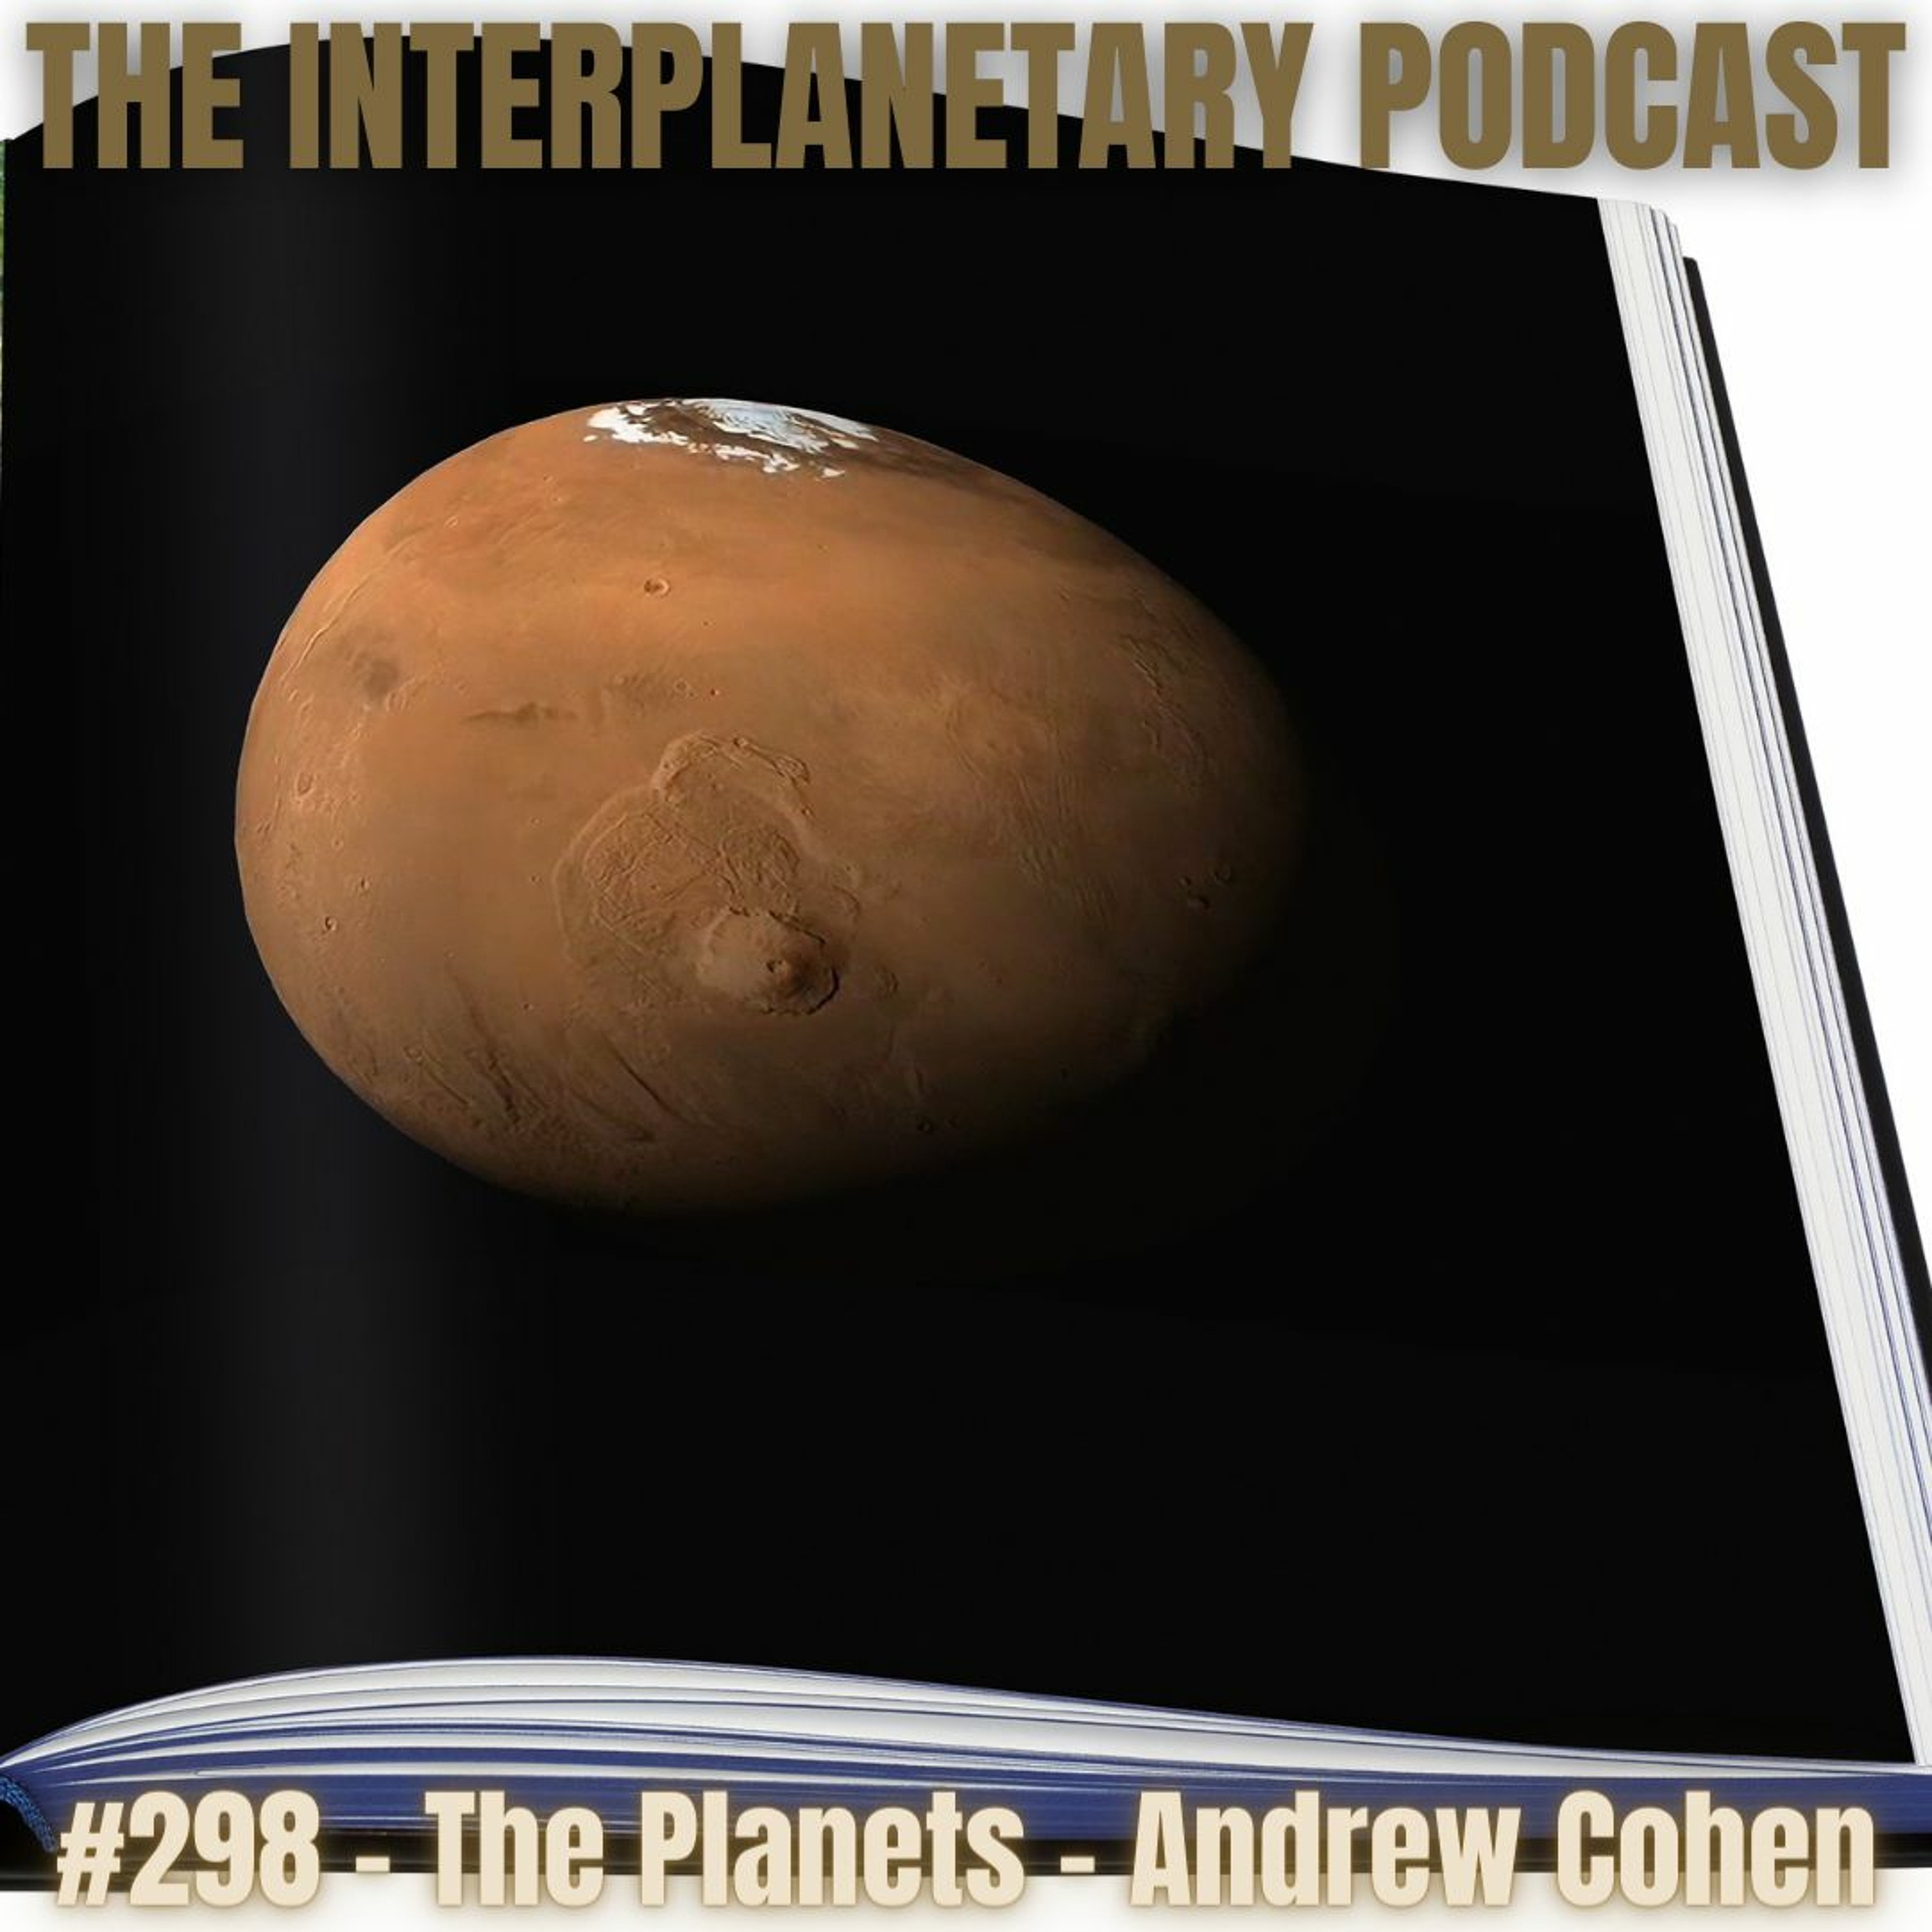 #298 - The Planets - Andrew Cohen